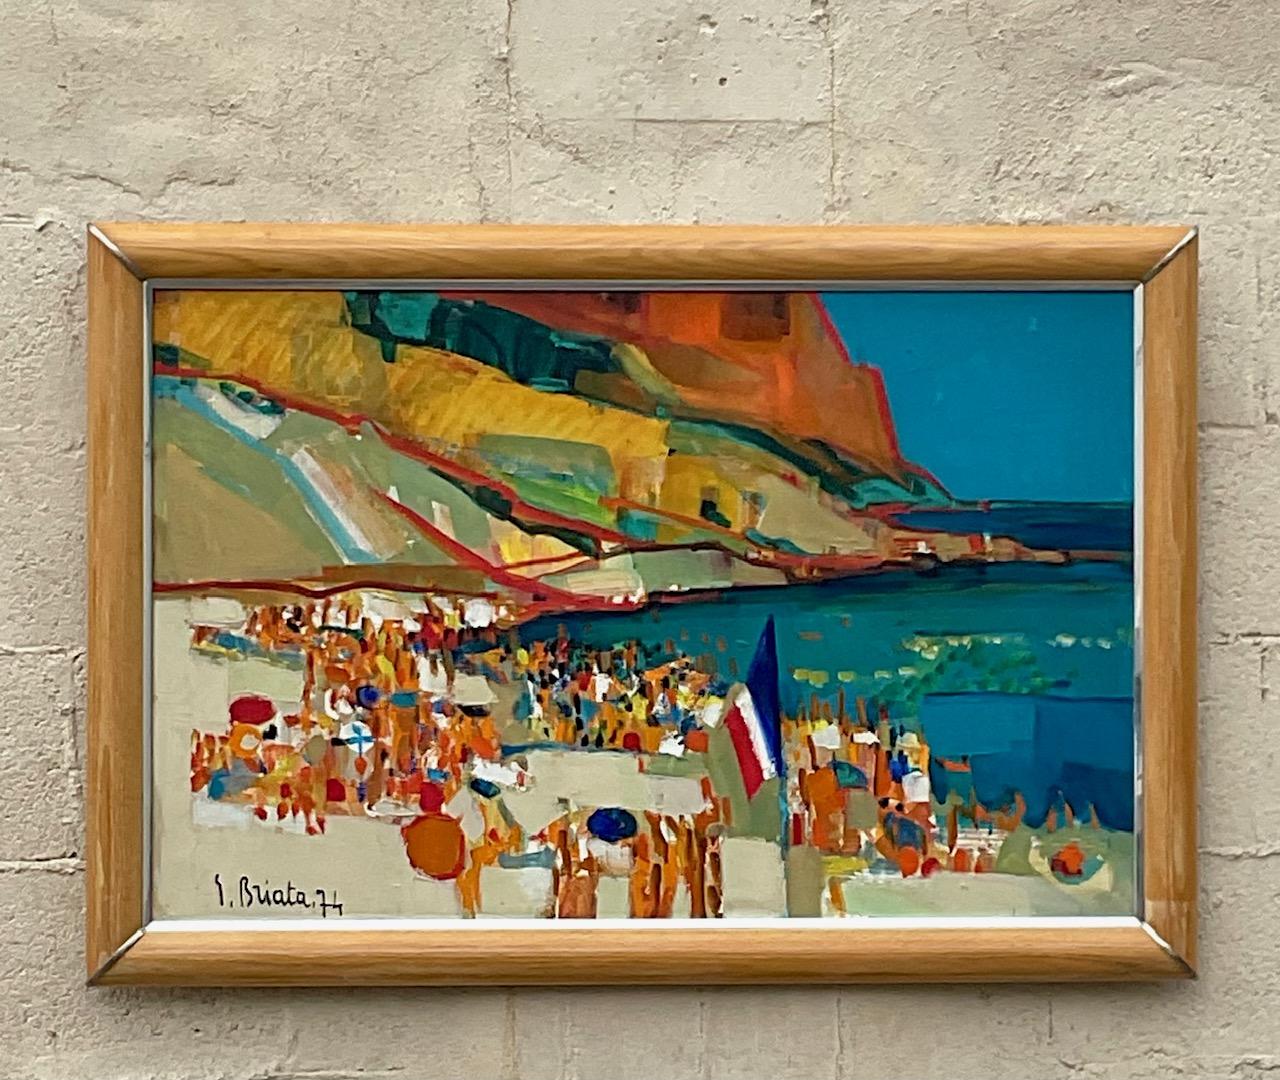 A fabulous vintage Coastal original oil painting on canvas. A chic coastline composition in bright clear colors. Signed and dated by the artist 1974. Acquired from a Palm Beach estate.